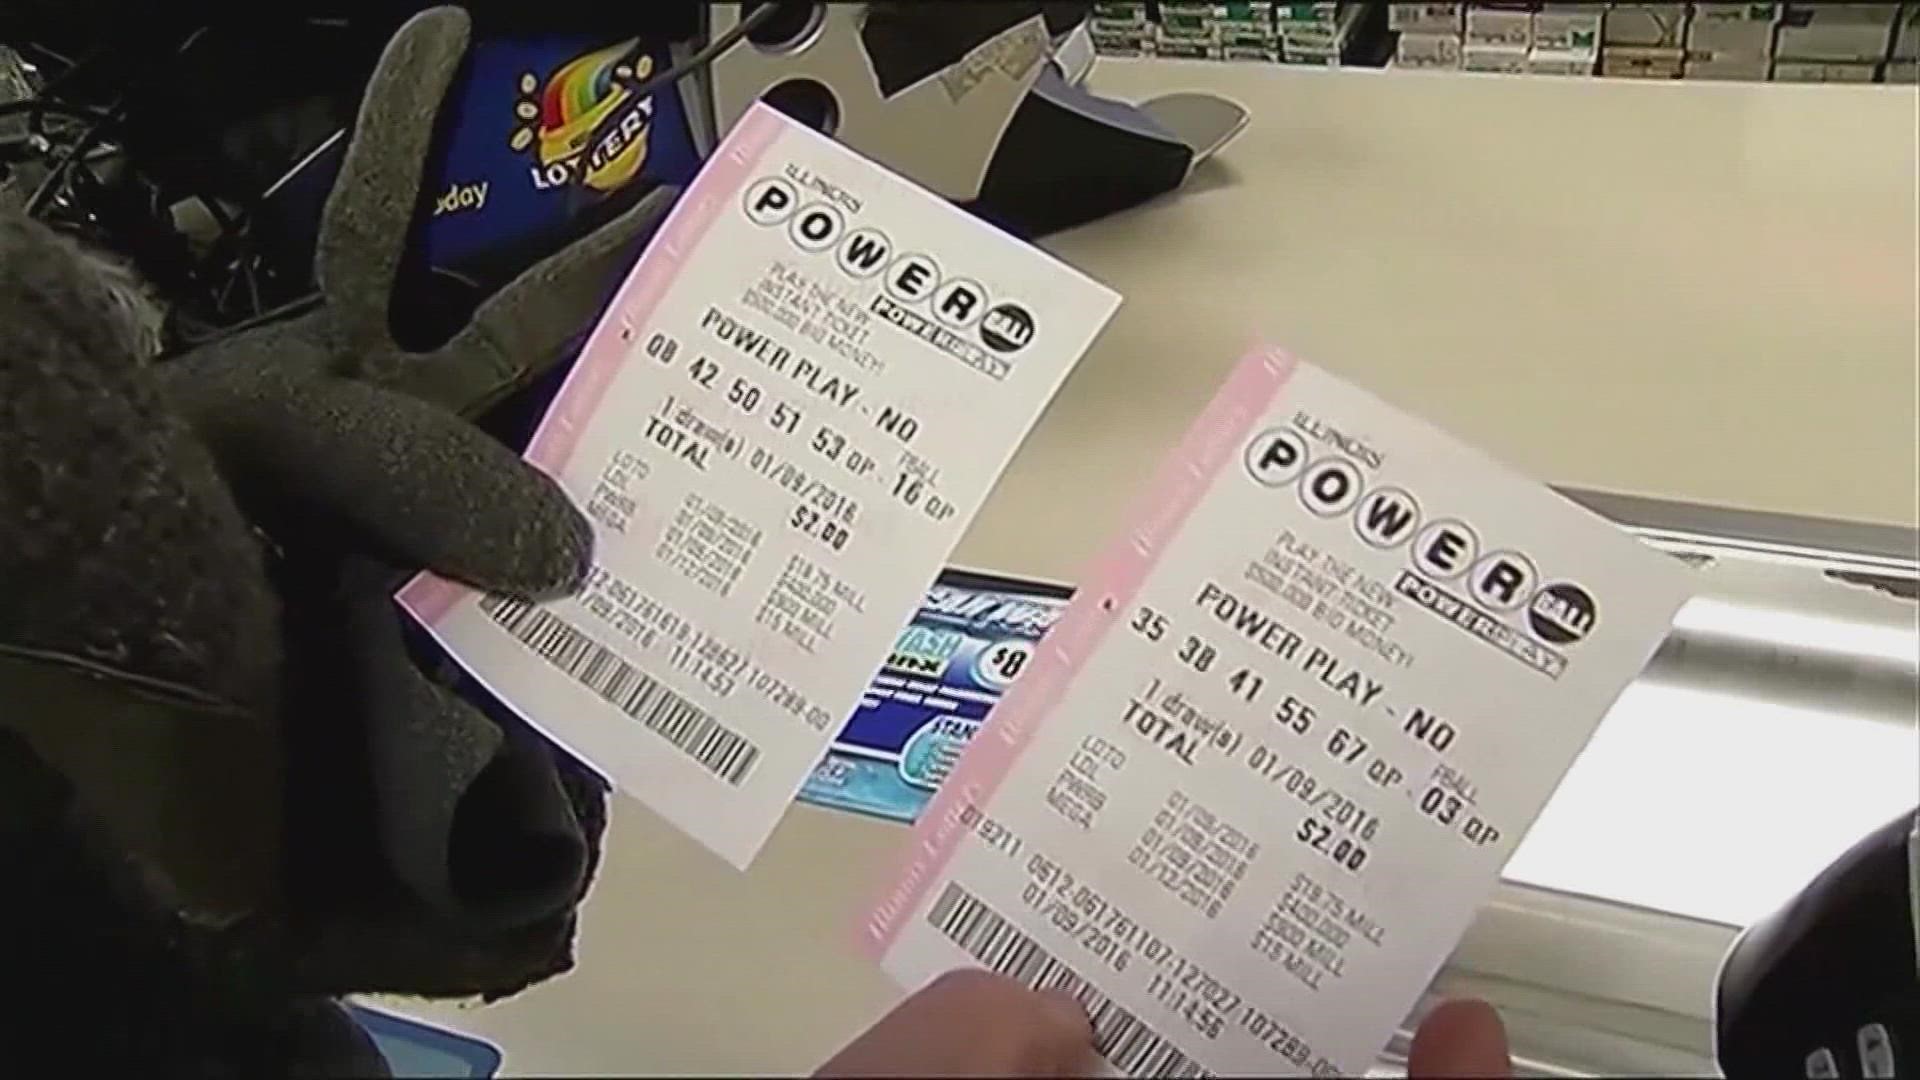 Monday's Powerball jackpot has climbed to a record level, making it the eighth largest prize in U.S. lottery history.